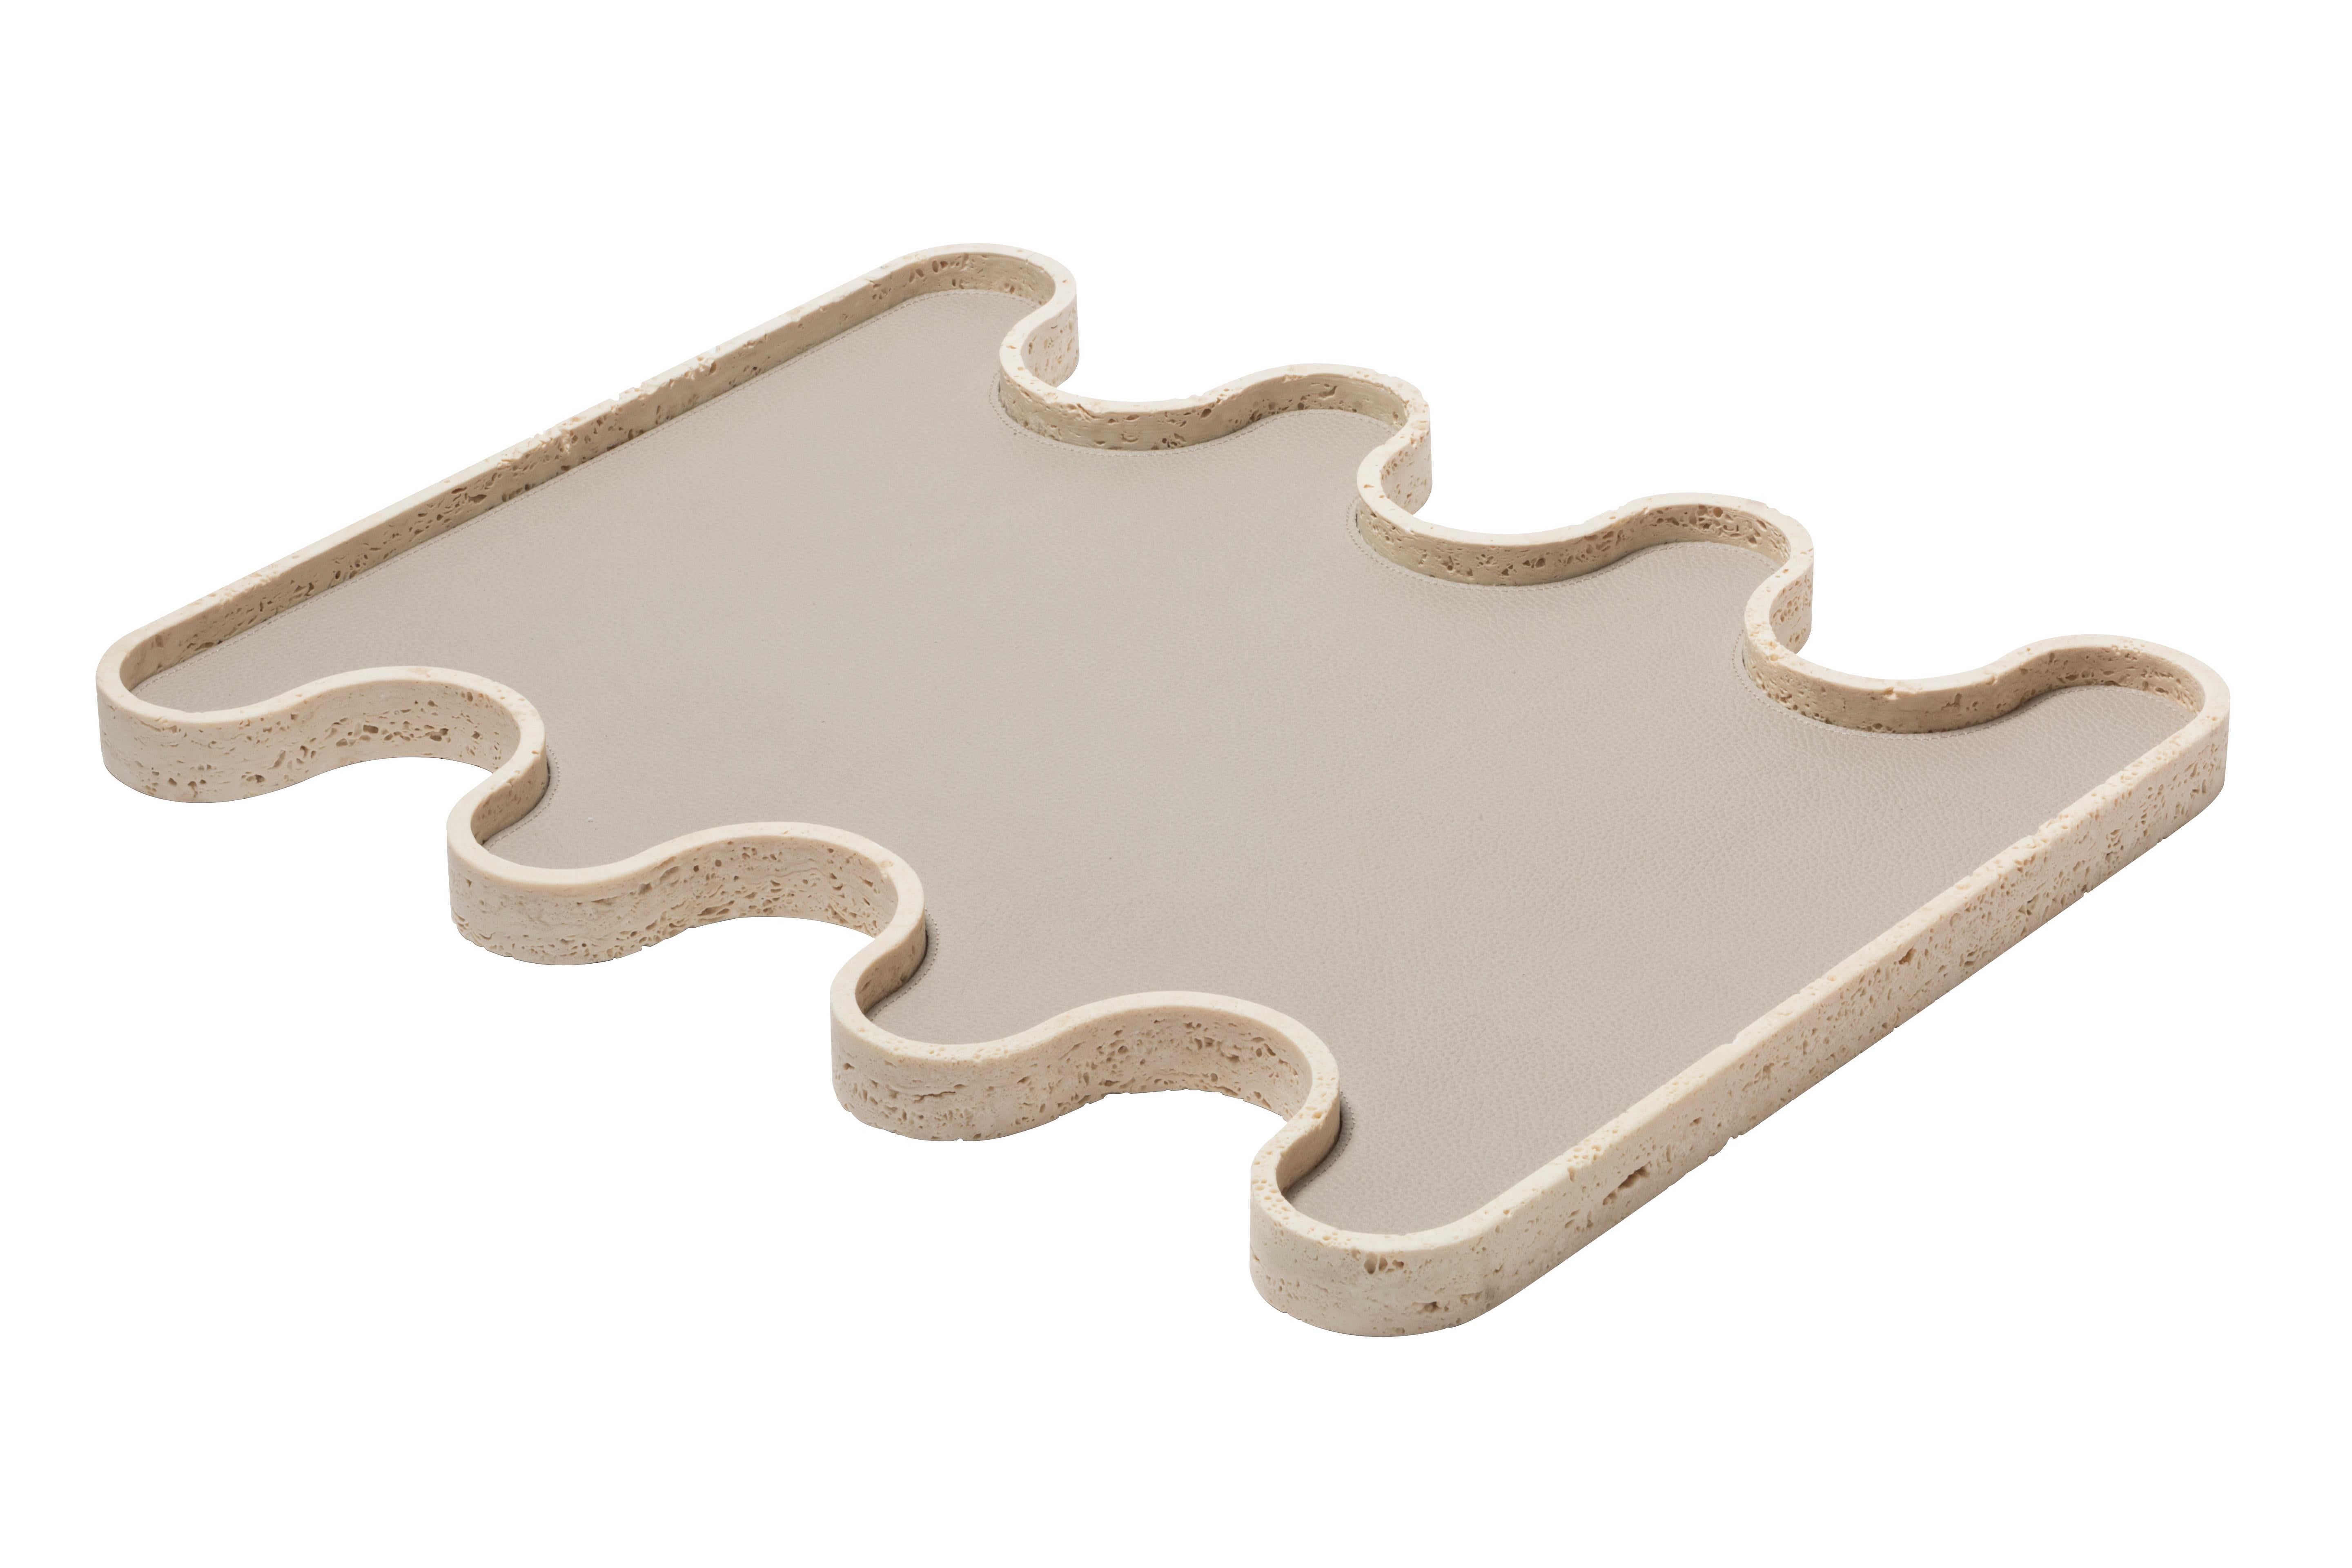 Ossicle Marble Tray (Large) -- Francesco Balzano x Giobagnara

Features removable double-faced placemat. Top available only in travertine. Leather pad available only in printed calfskin, suede, or nappa finish. Pictures above are of the large tray;